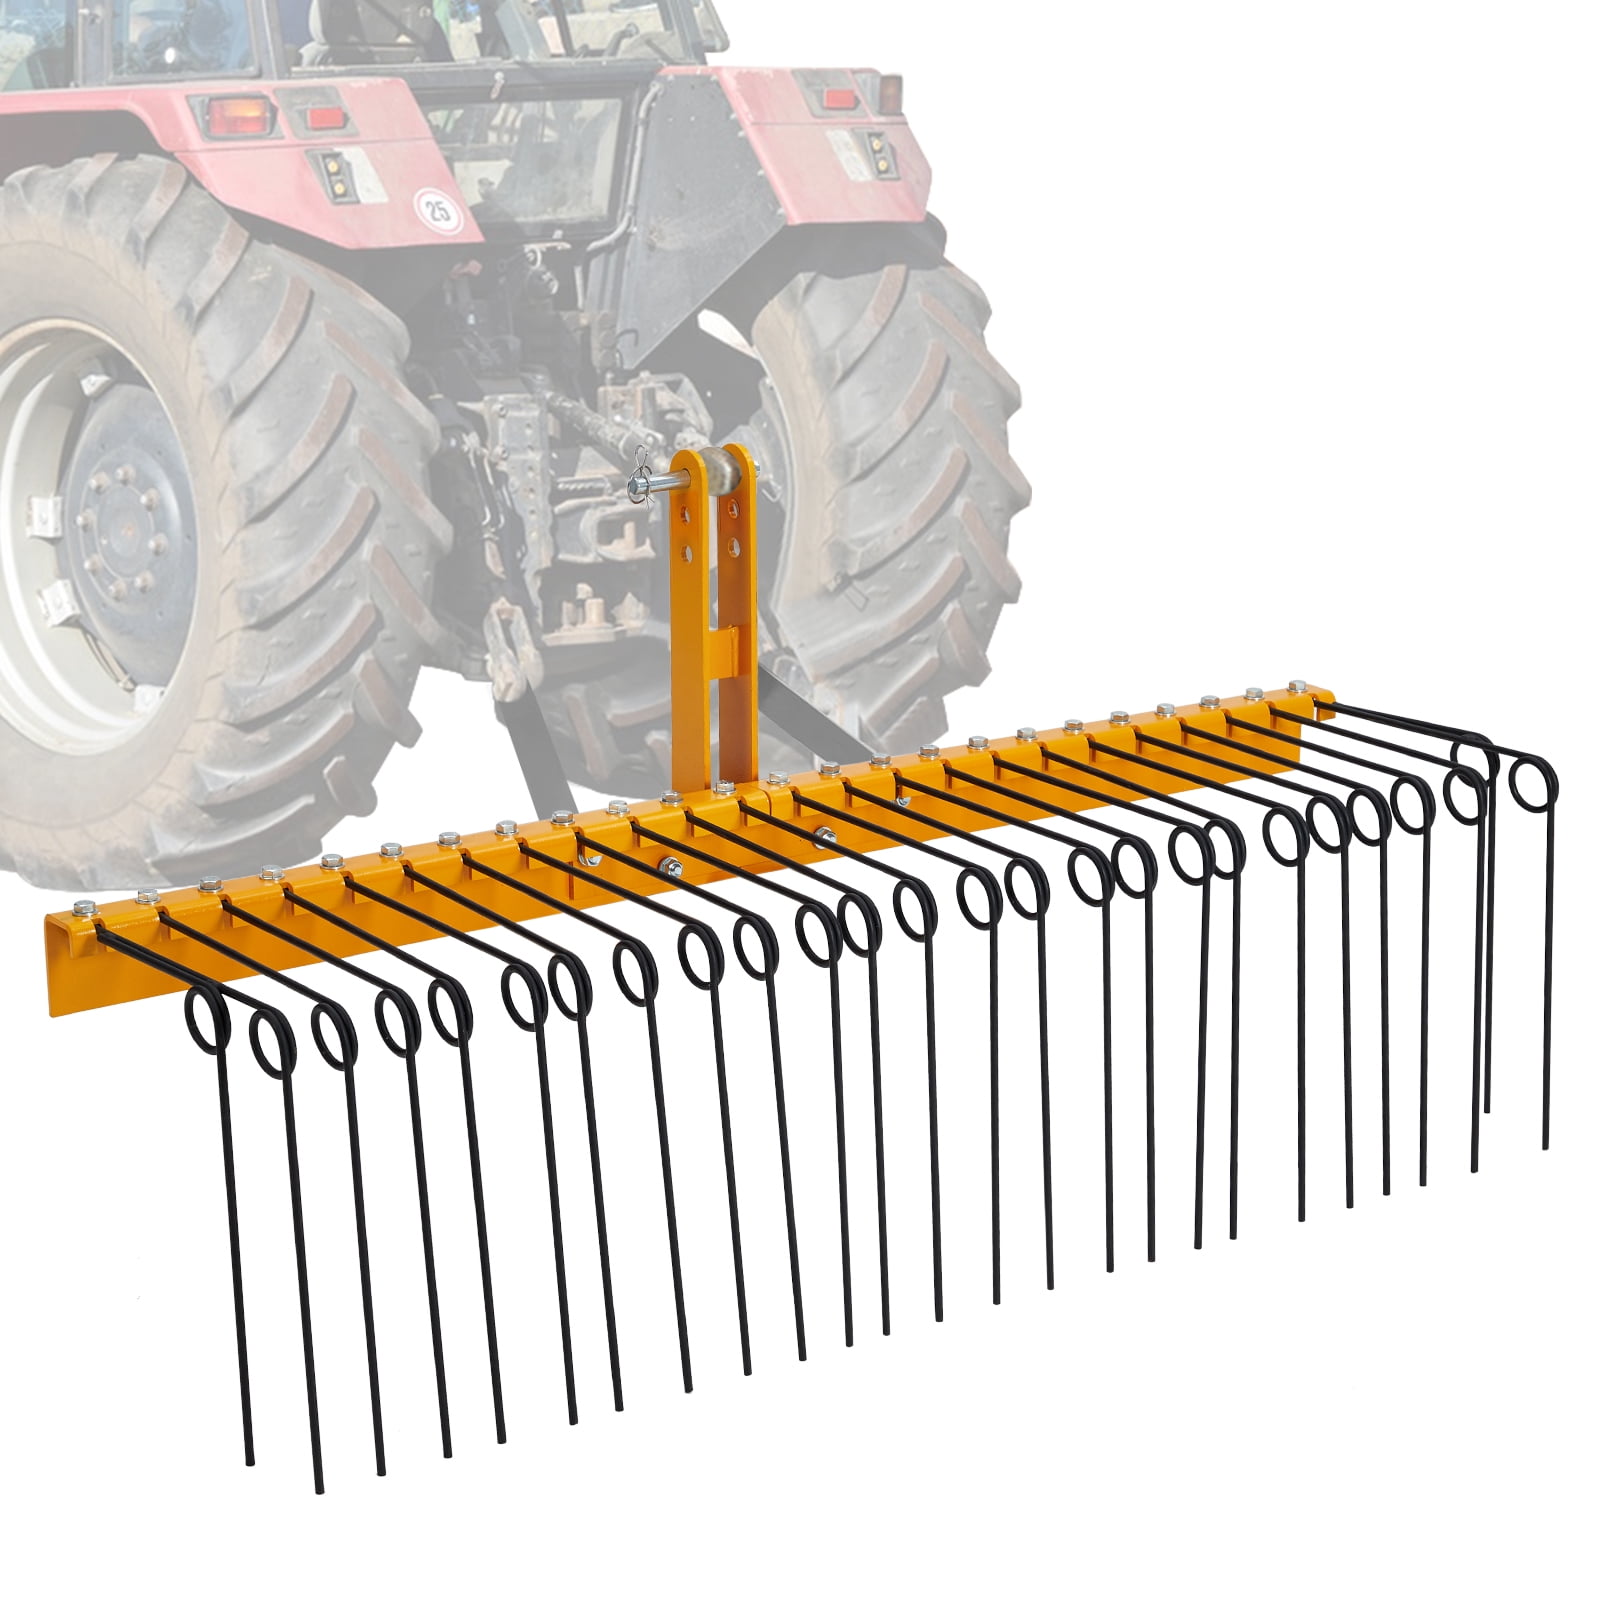 60 Inch Pine Straw Rake, 26 Coil Spring Tines, Durable Powder Coated ...